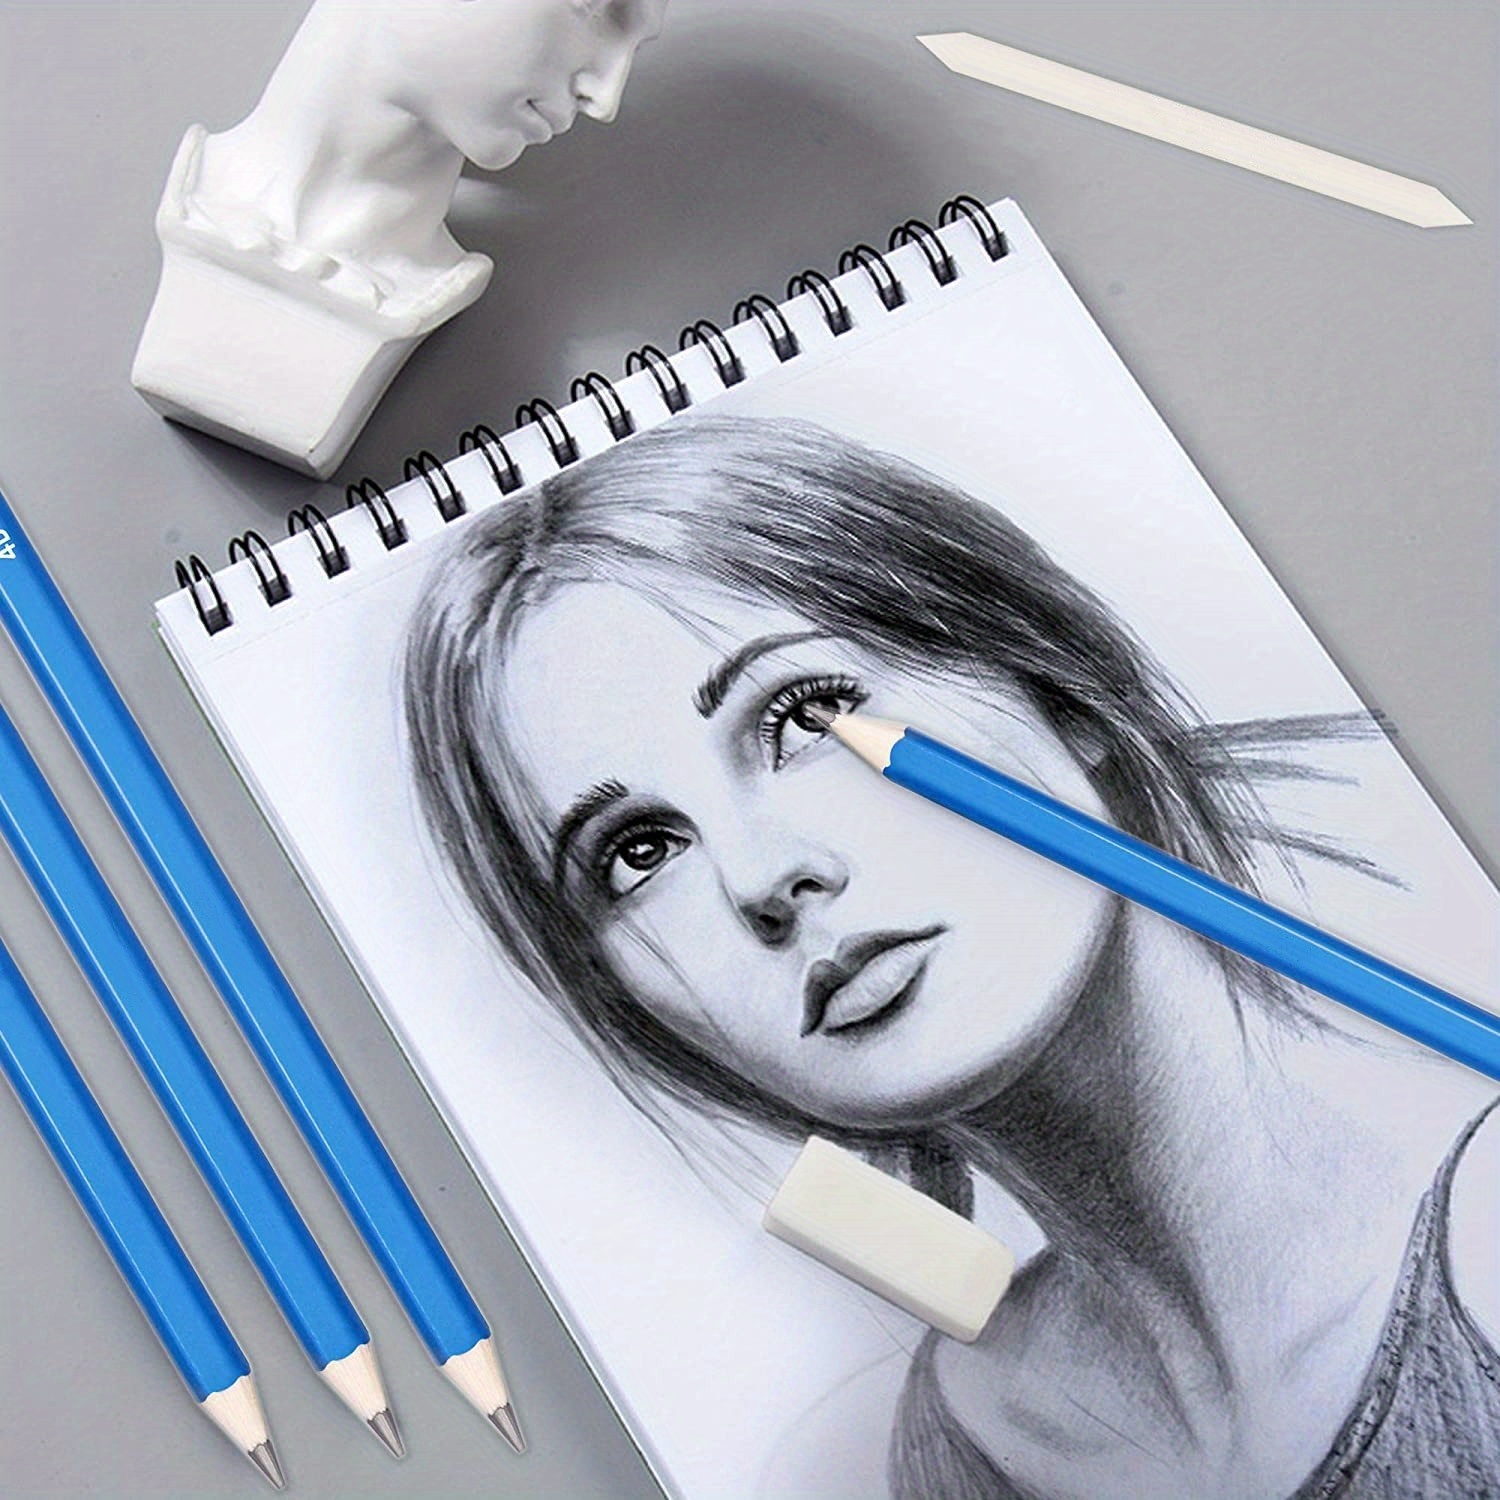 Wholesale Marco Professional Drawing Art Kit With Charcoal Sketch Pencil  Sketching For Beginners, Paper Erasers Graphite Pencils Knife Art Supplies  201102 From Dou08, $13.71